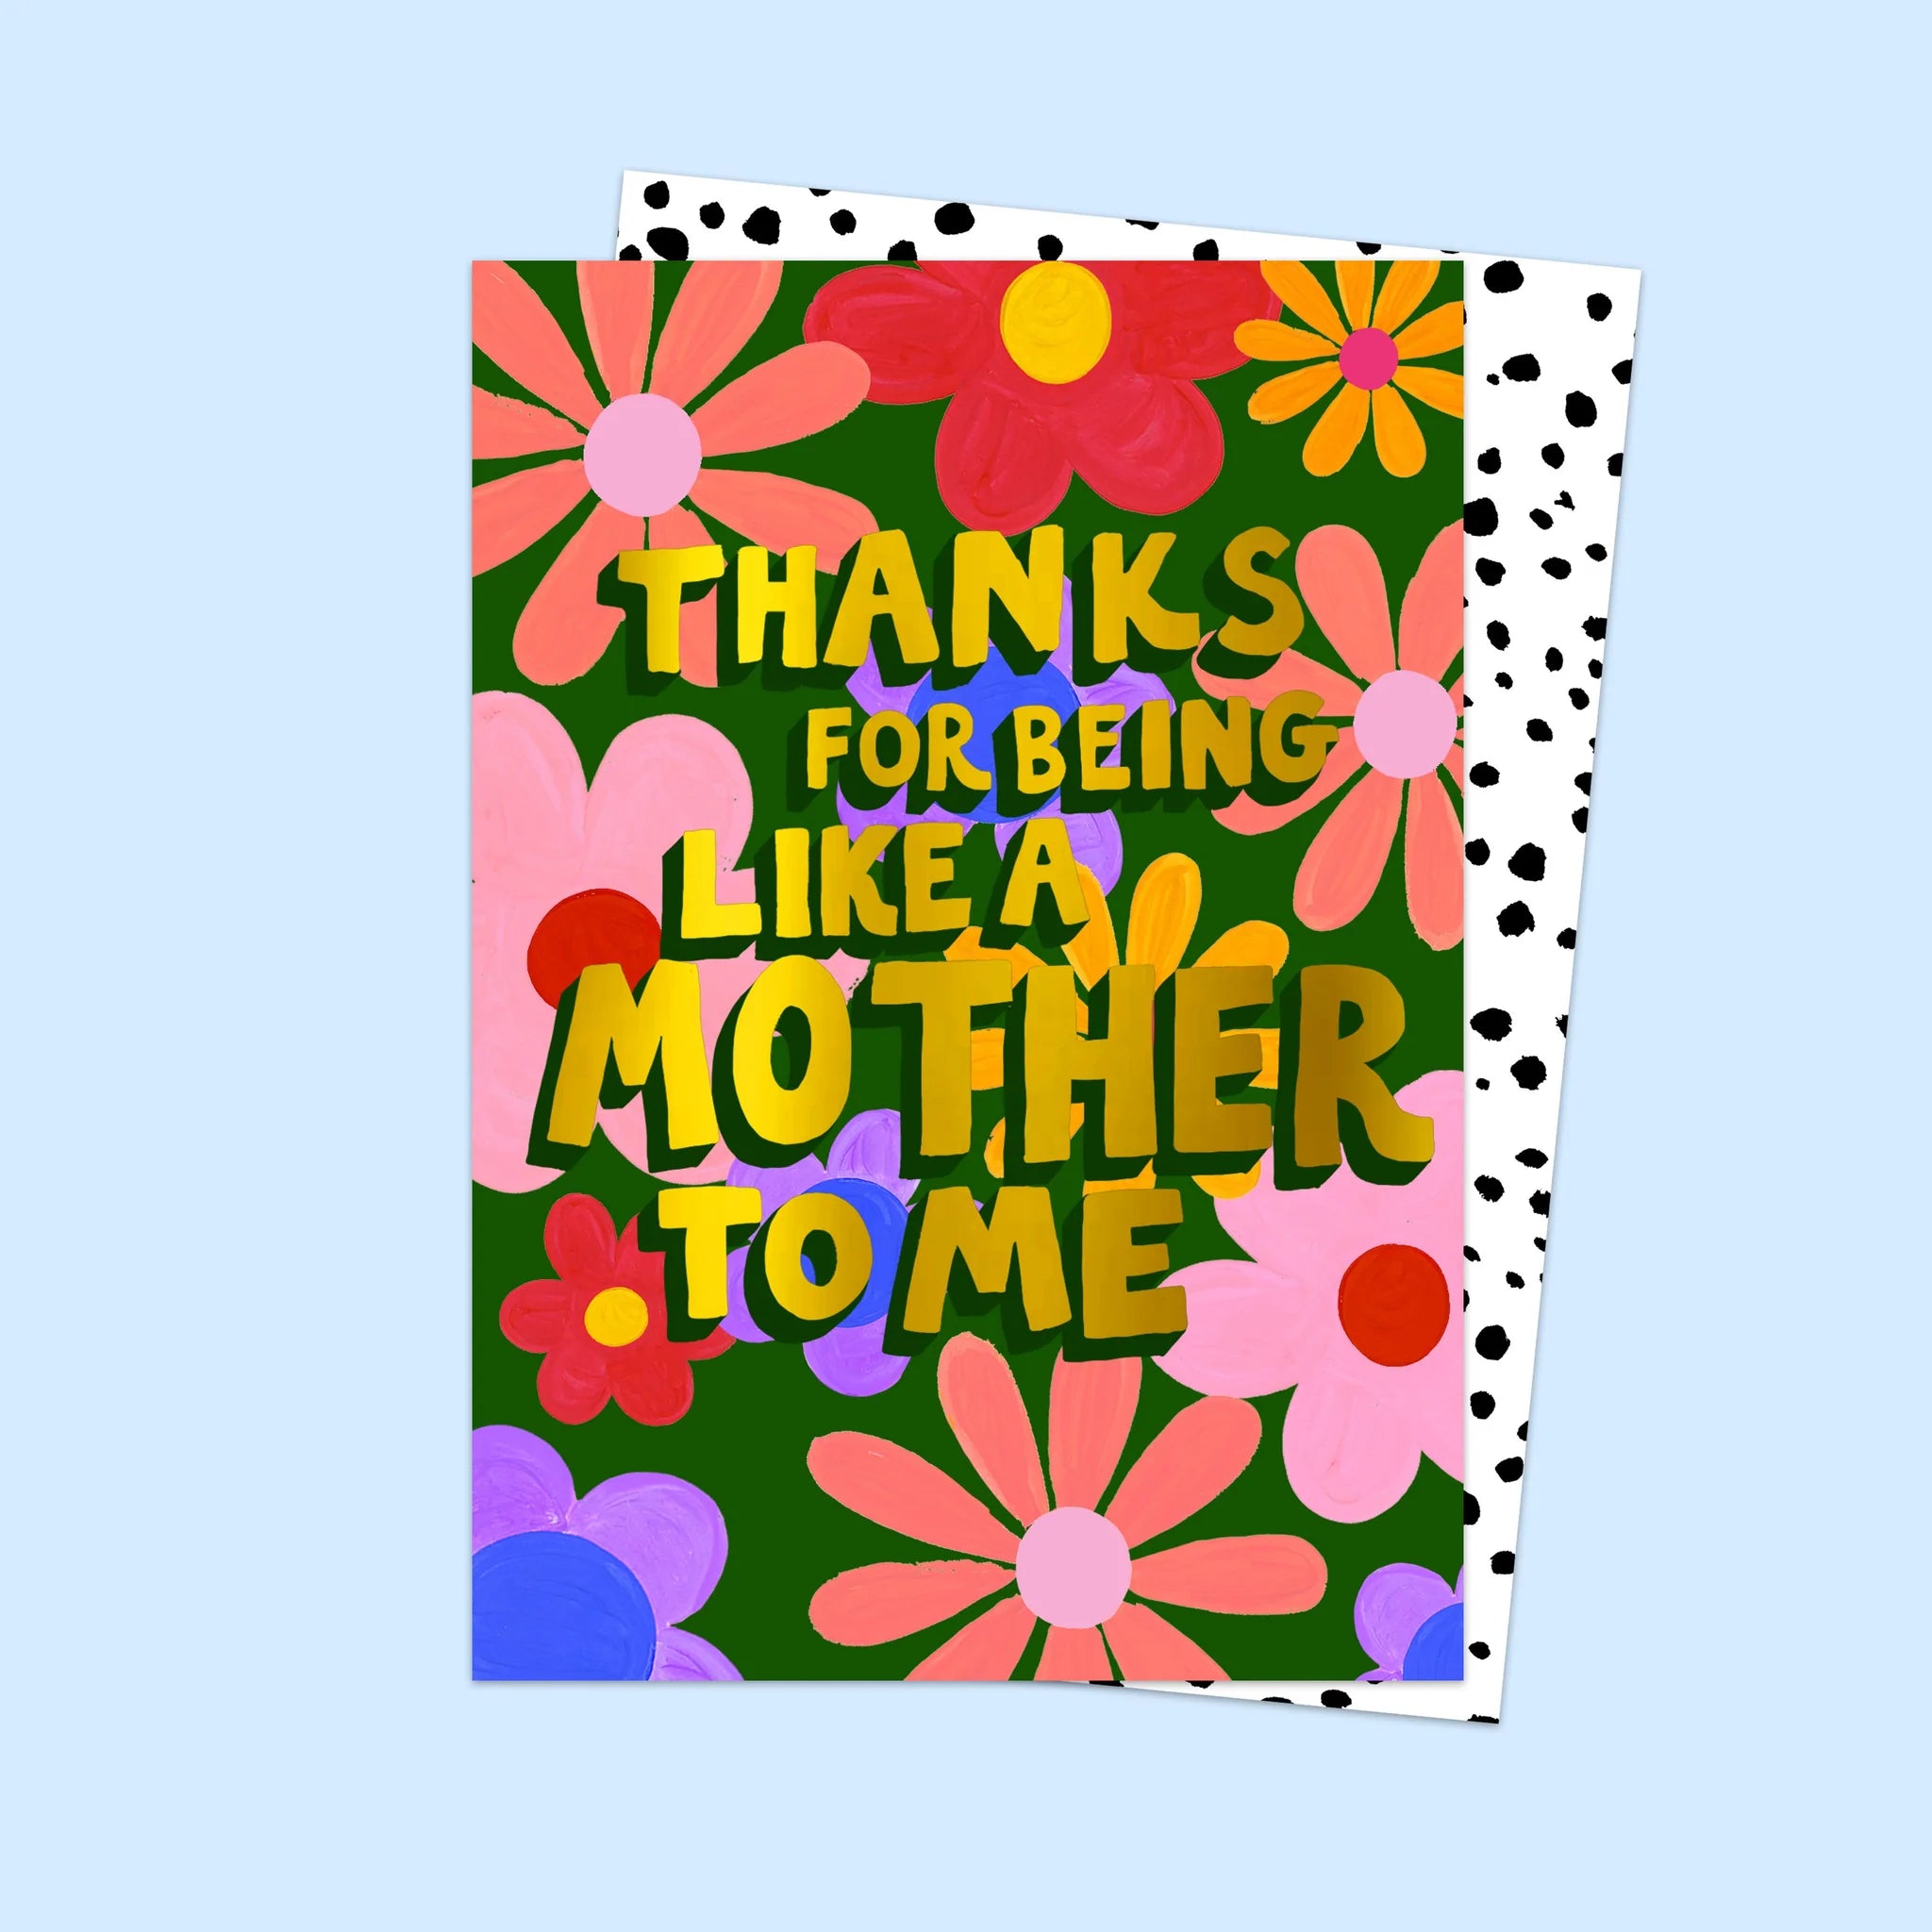 THANKS FOR BEING LIKE A MOTHER TO ME | CARD BY ELEANOR BOWMER